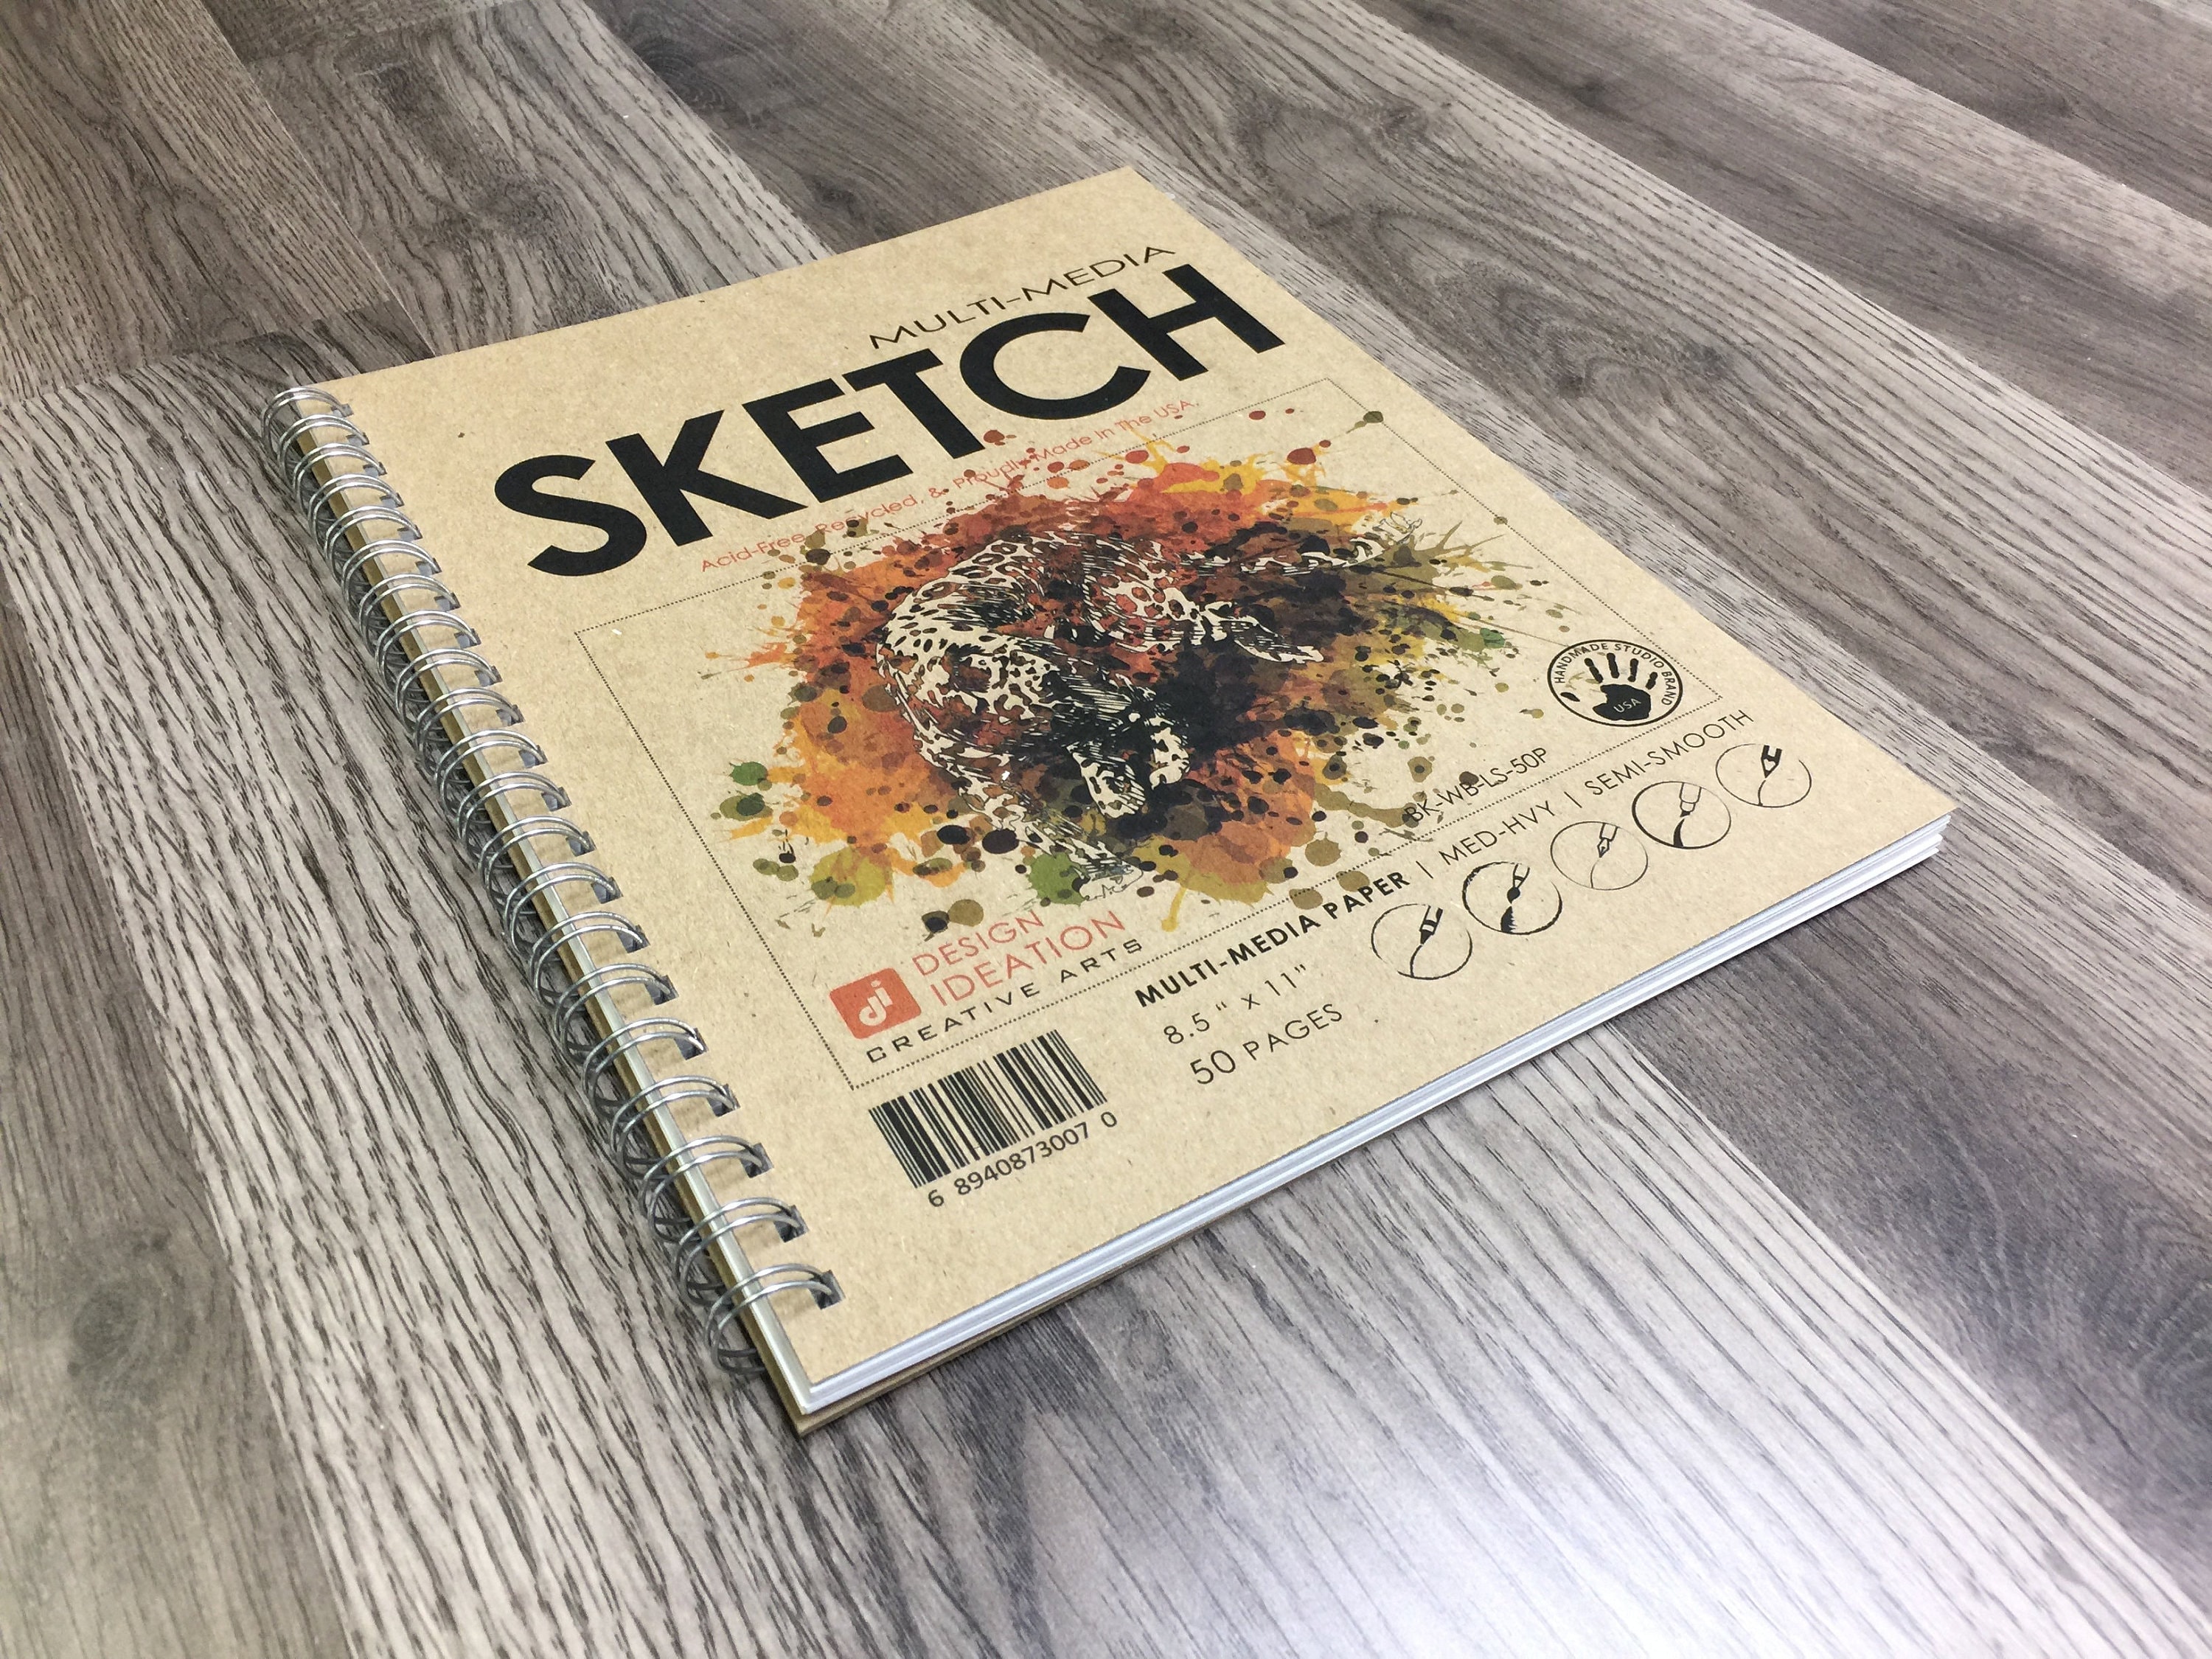  Design Ideation Multi-Media Sketch Book Spiral Bound, Heavy  Paper Sketchbook For Pencil, Ink, Marker, Charcoal And Watercolor Paints  Great For Art, Design And Education